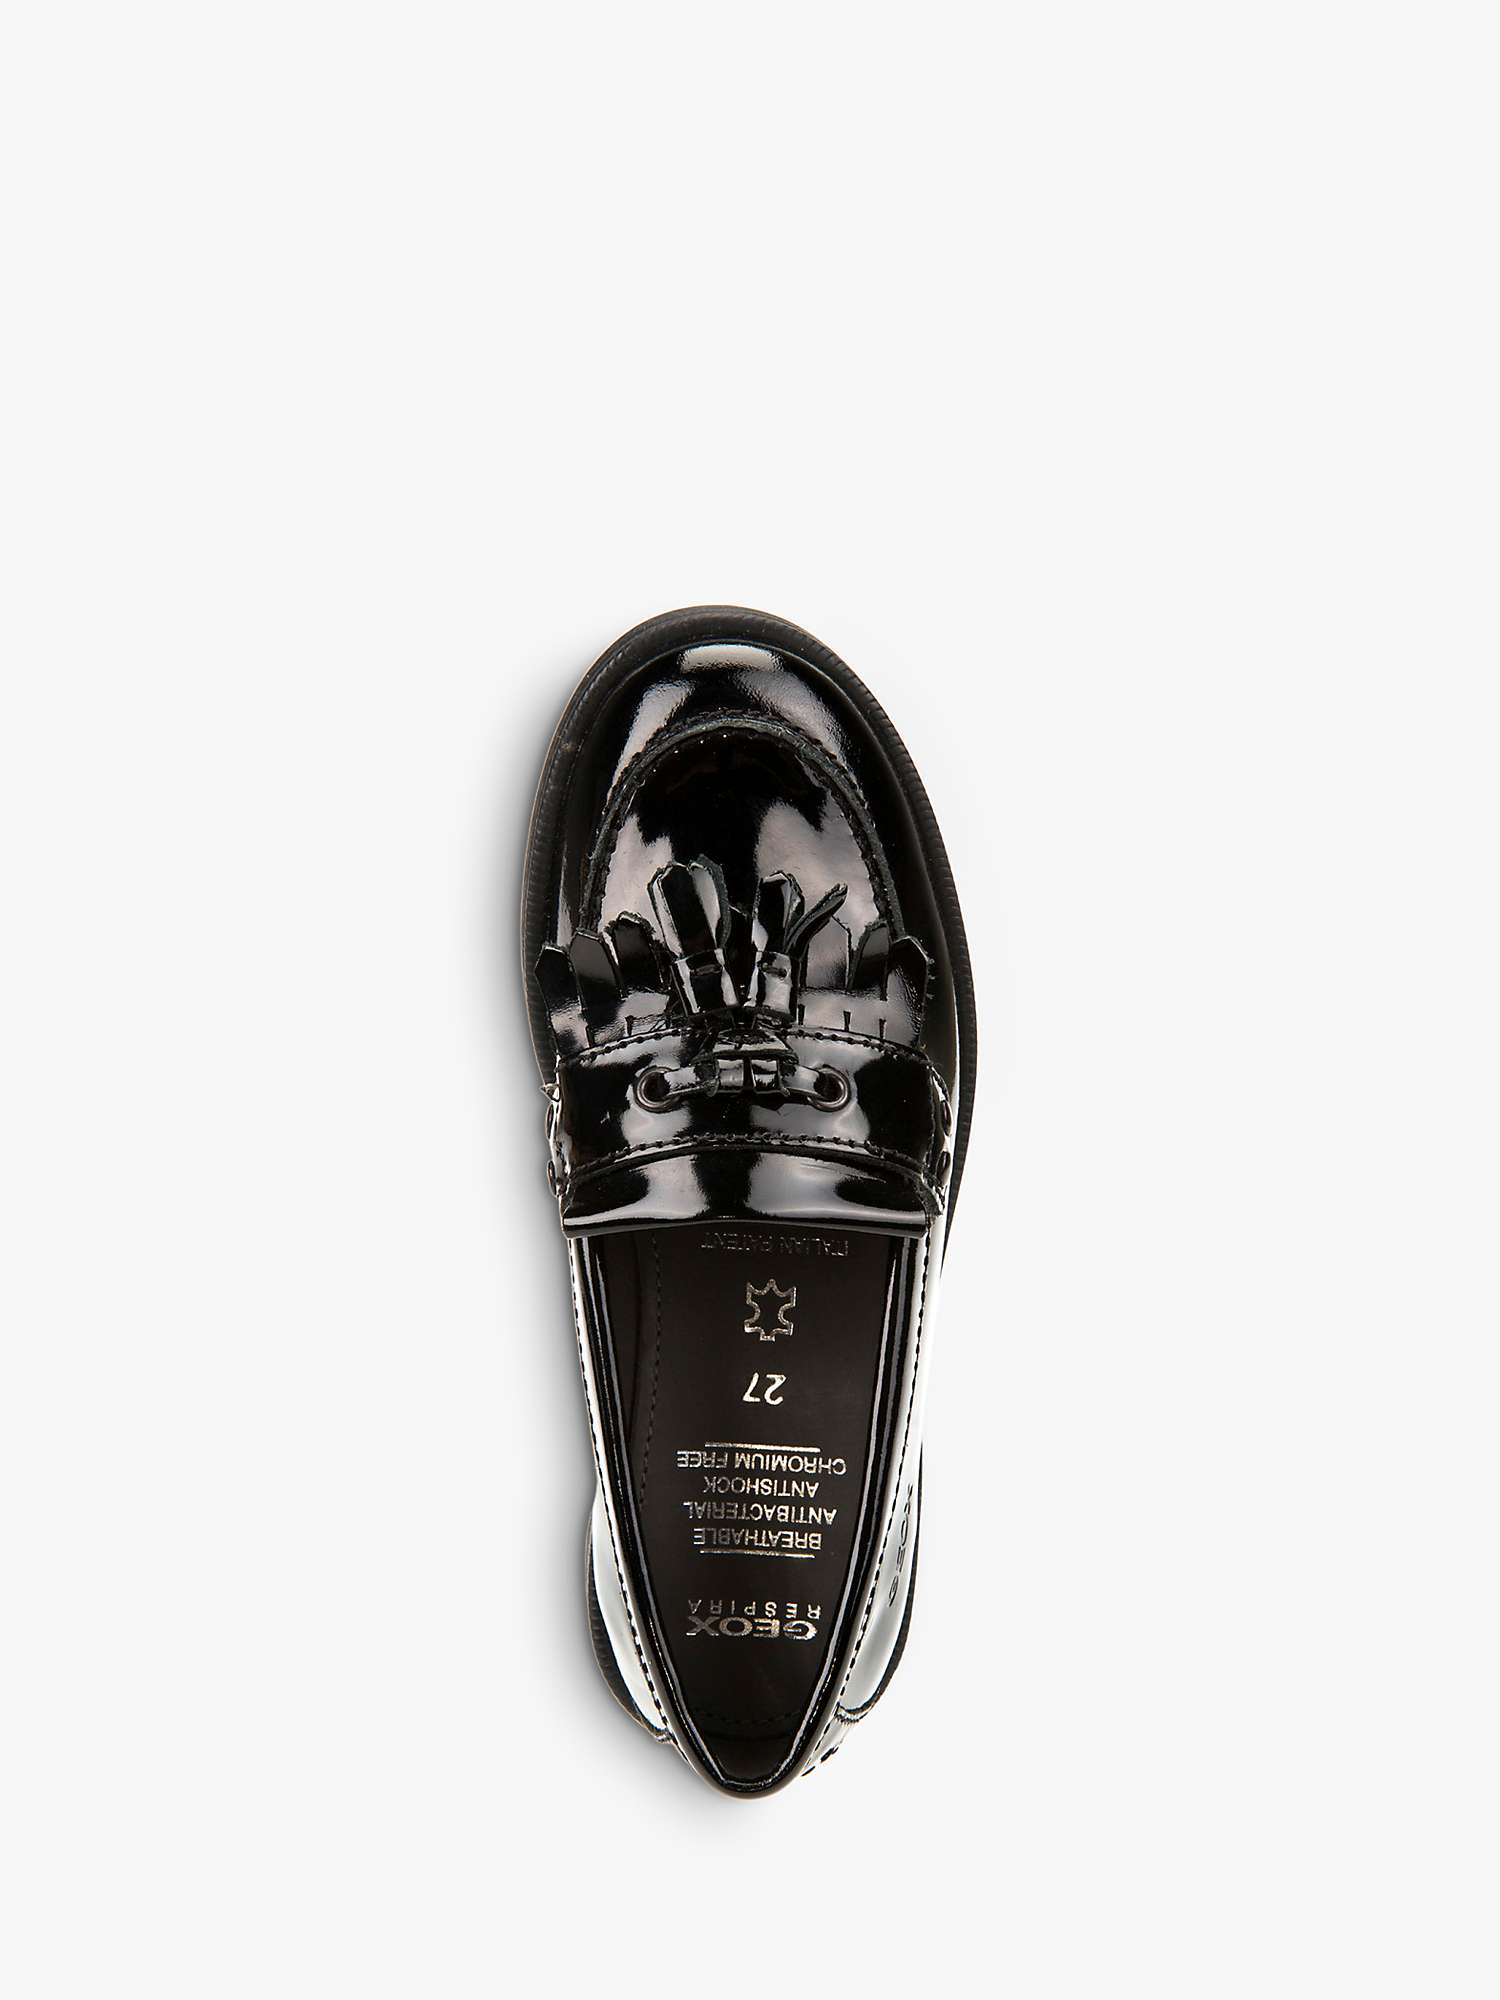 Buy Geox Kids' Agata Slip On Leather Loafers Online at johnlewis.com